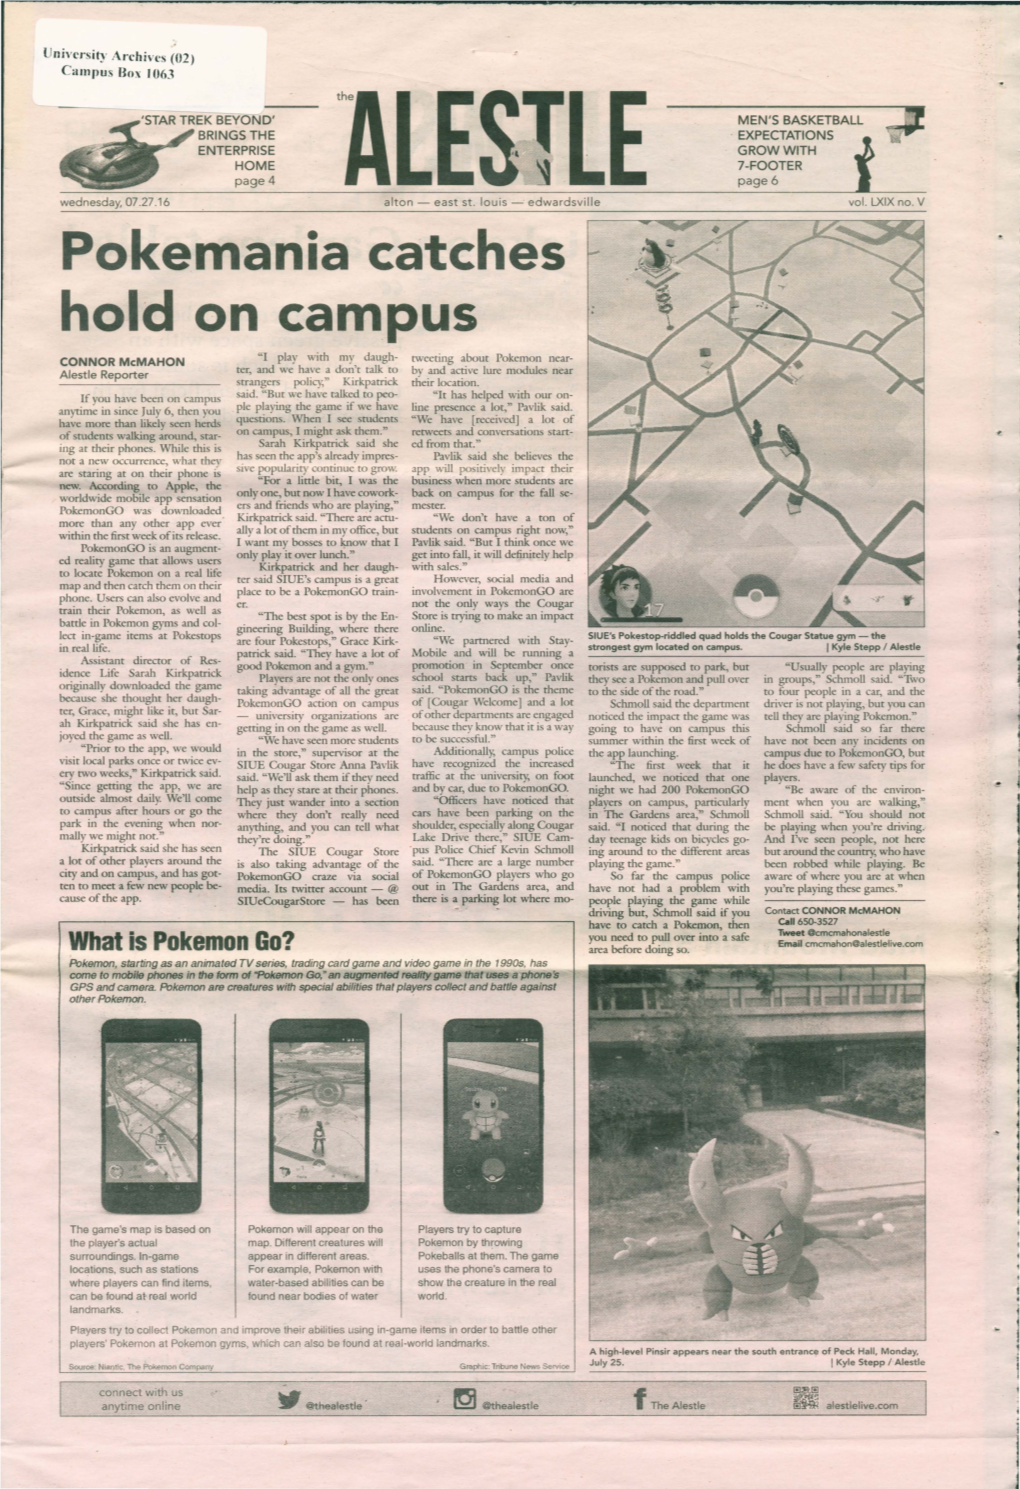 Pokemania Catches Hold on Campus